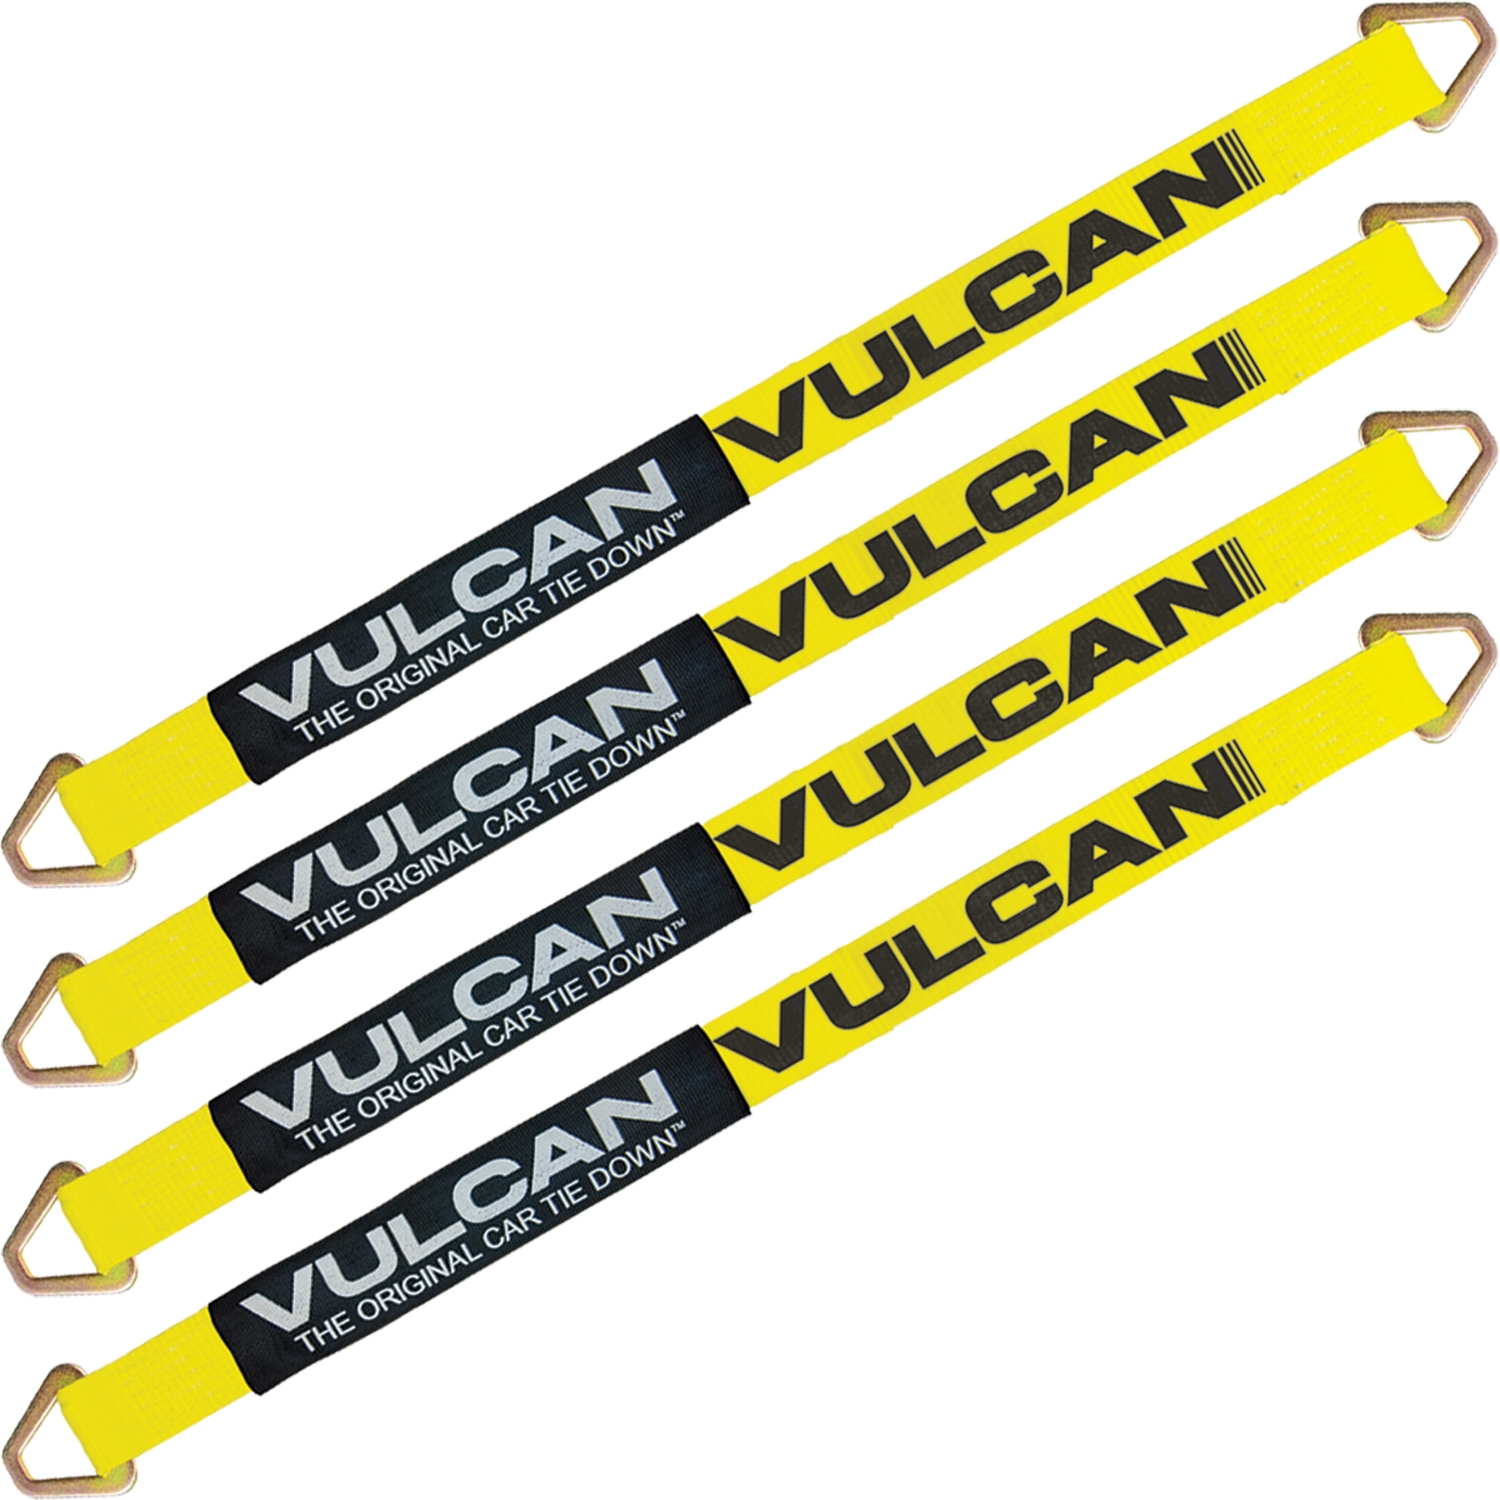 3,300 lbs- 4 Pack 2 x 22 VULCAN ProSeries 1-Ply Flexible Auto Tie Down Axle Strap w/Wear Pad Safe Working Load 